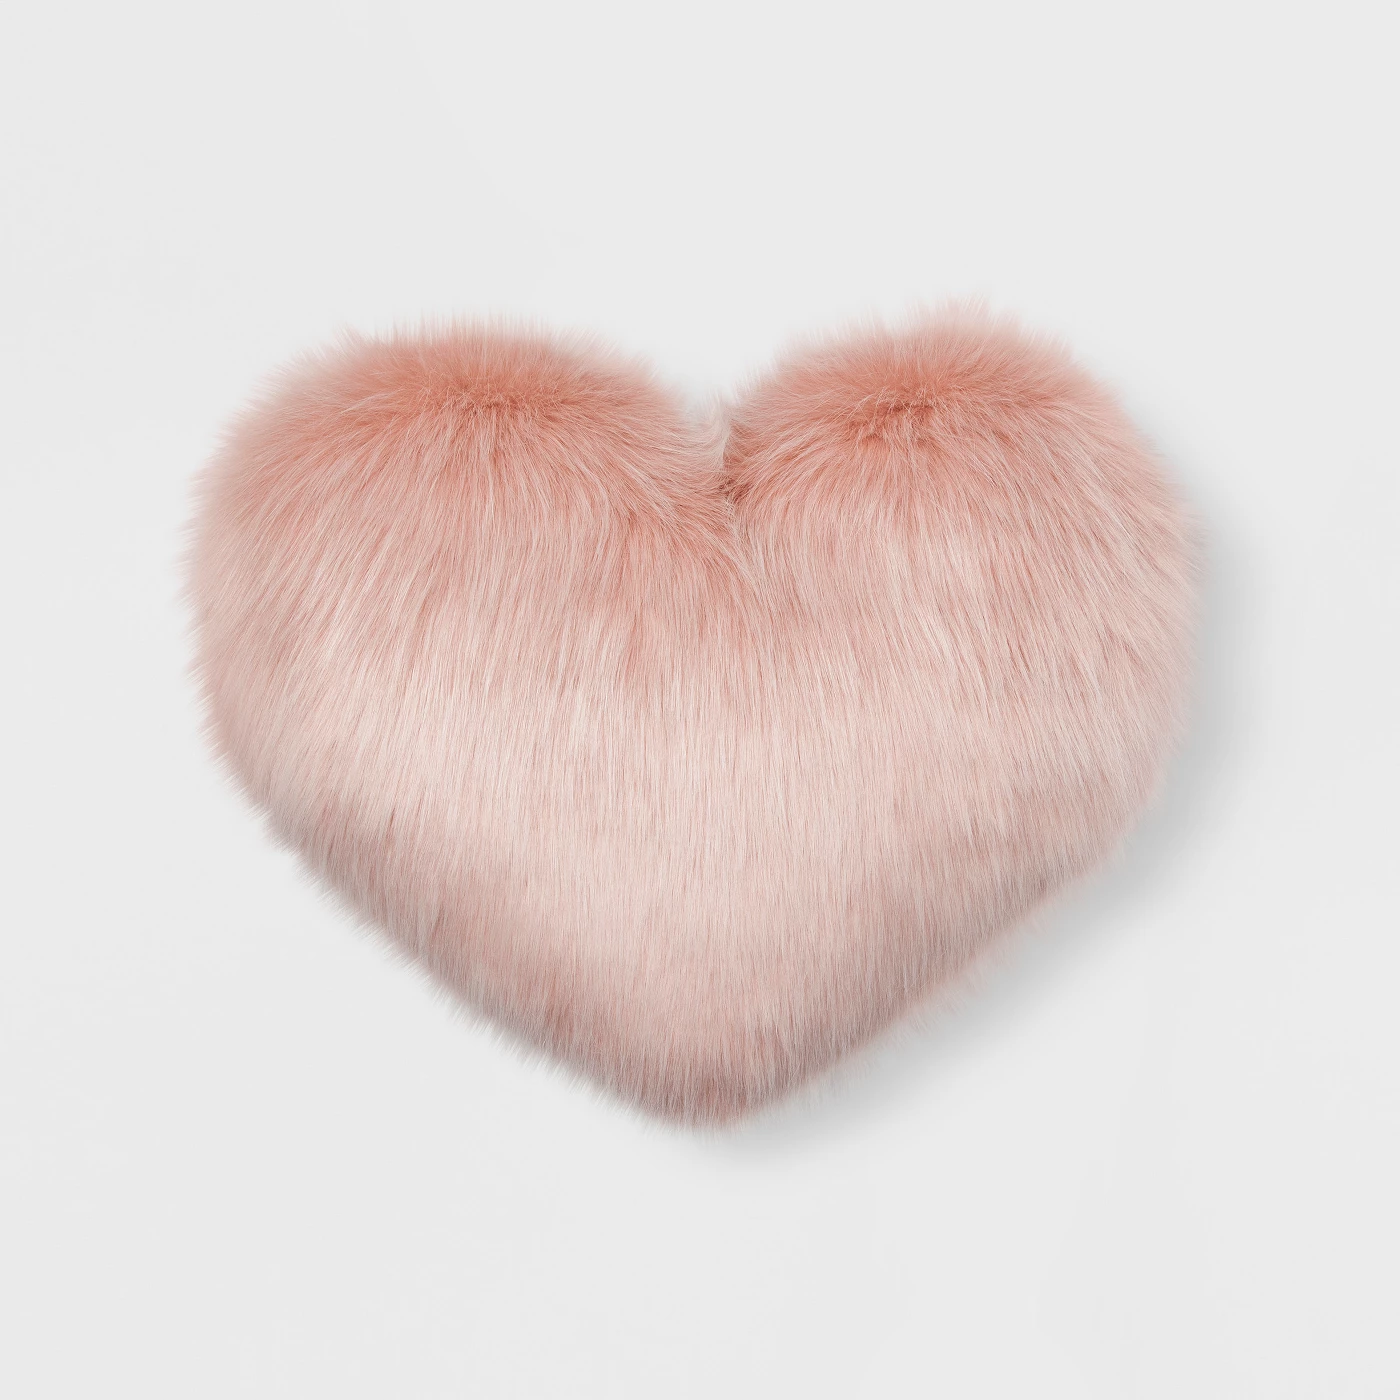 Faux Fur Oversized Heart Throw Pillow - image 1 of 2